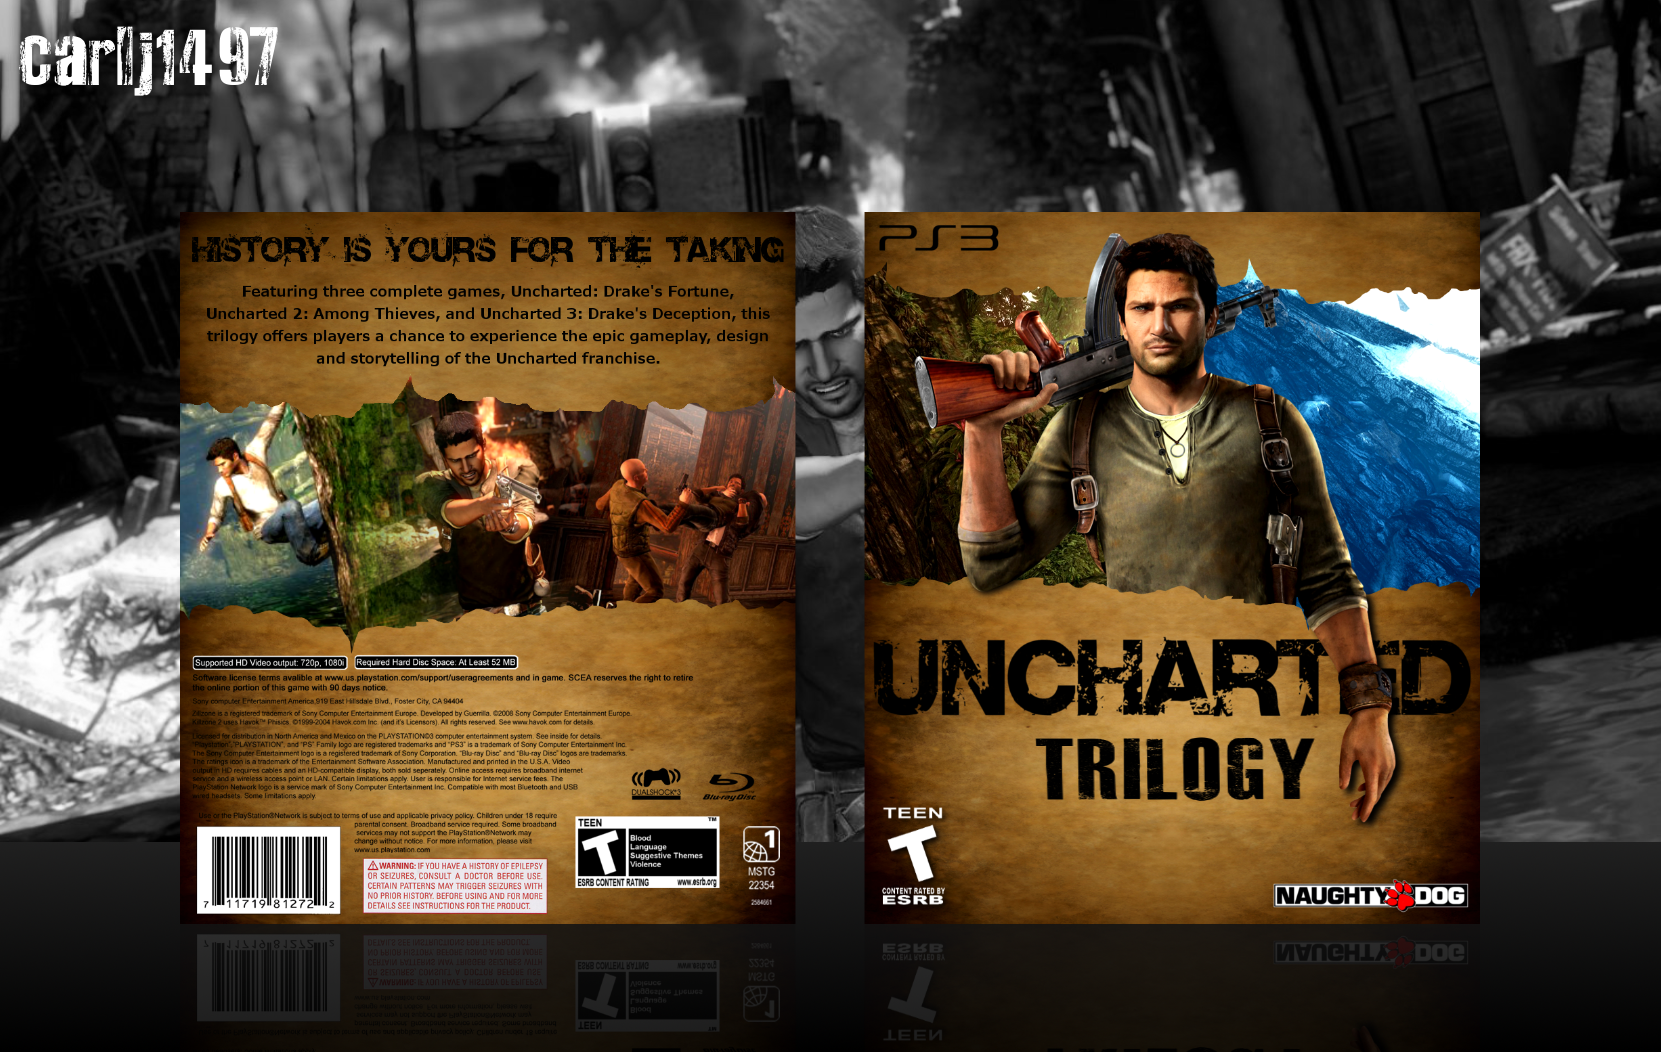 Uncharted Trilogy box cover